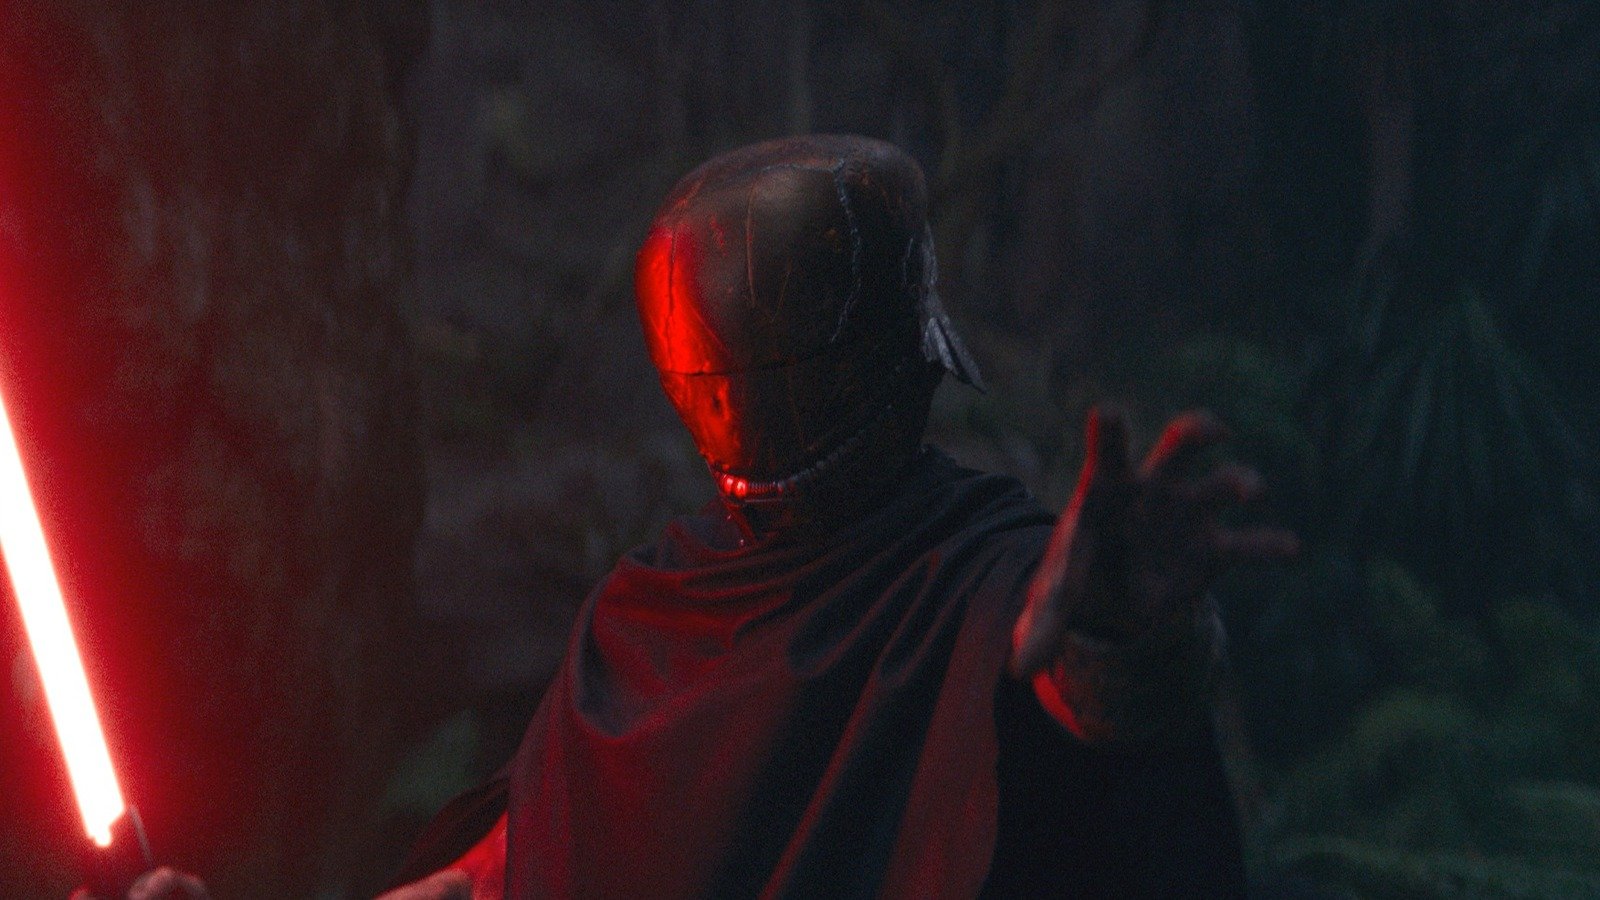 How The Acolyte's Sith Villain Cut Off Lightsabers & The Force In Episode 5